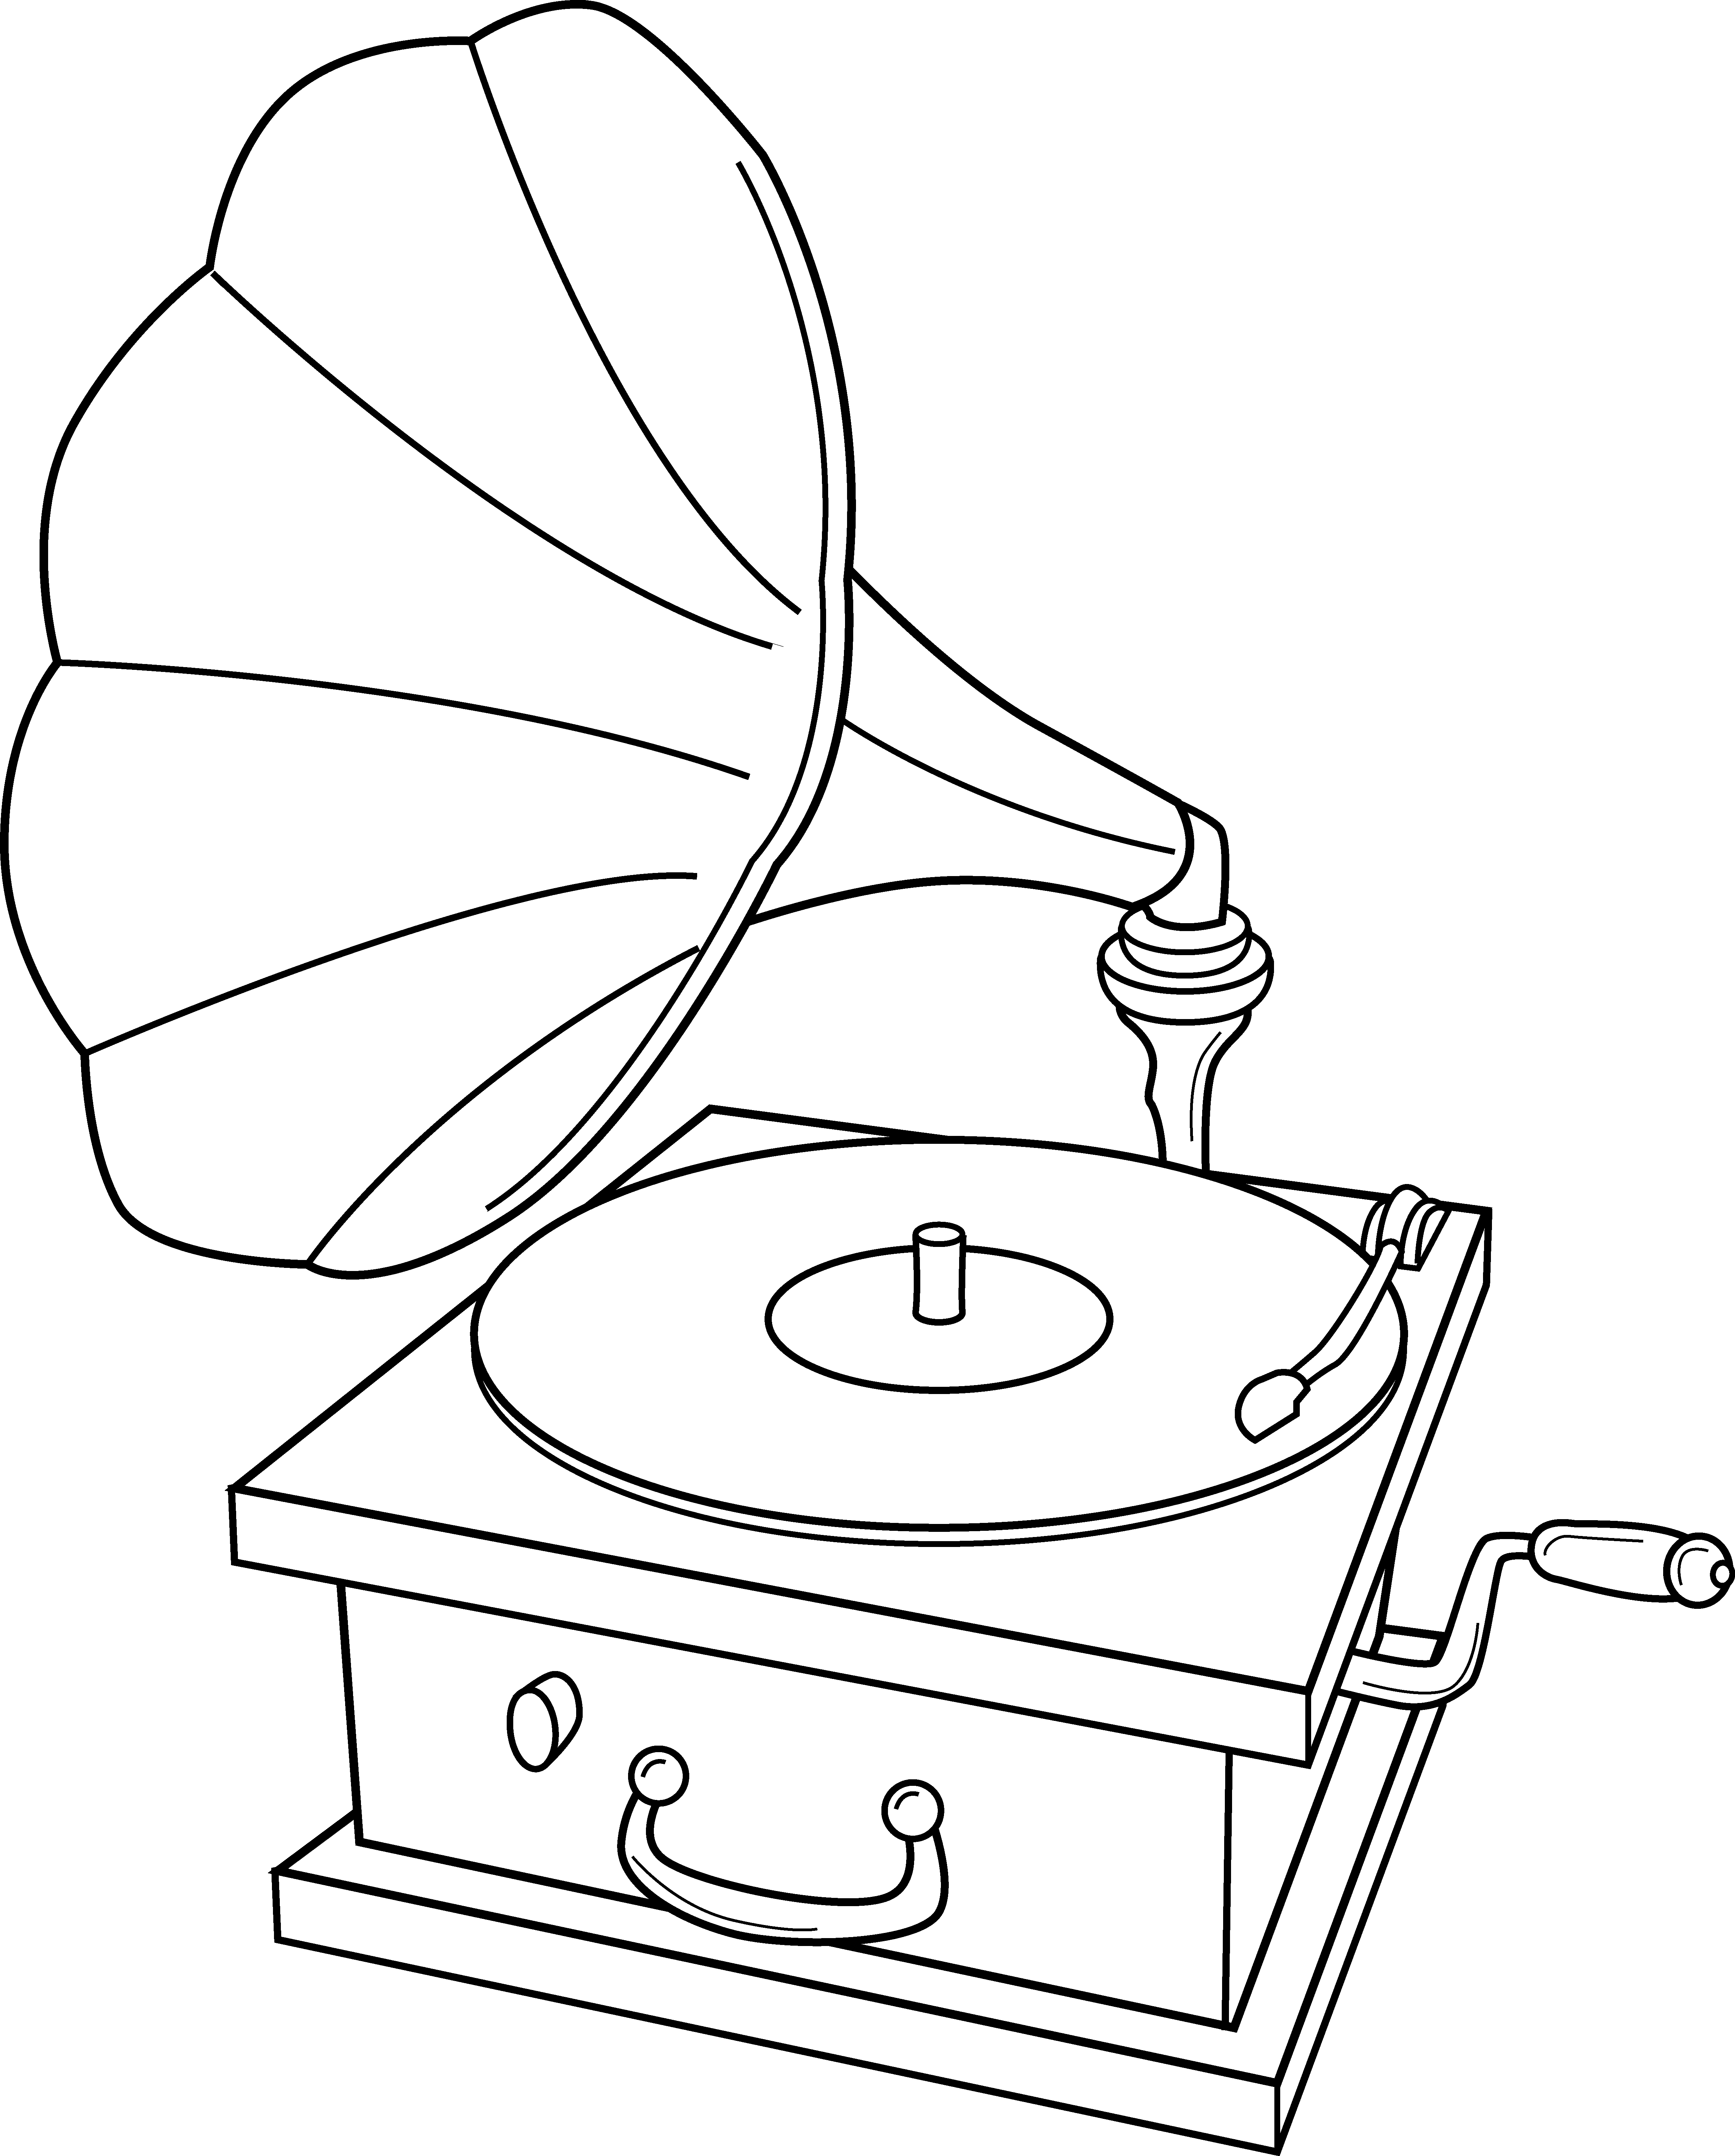 Record Player Coloring Page.